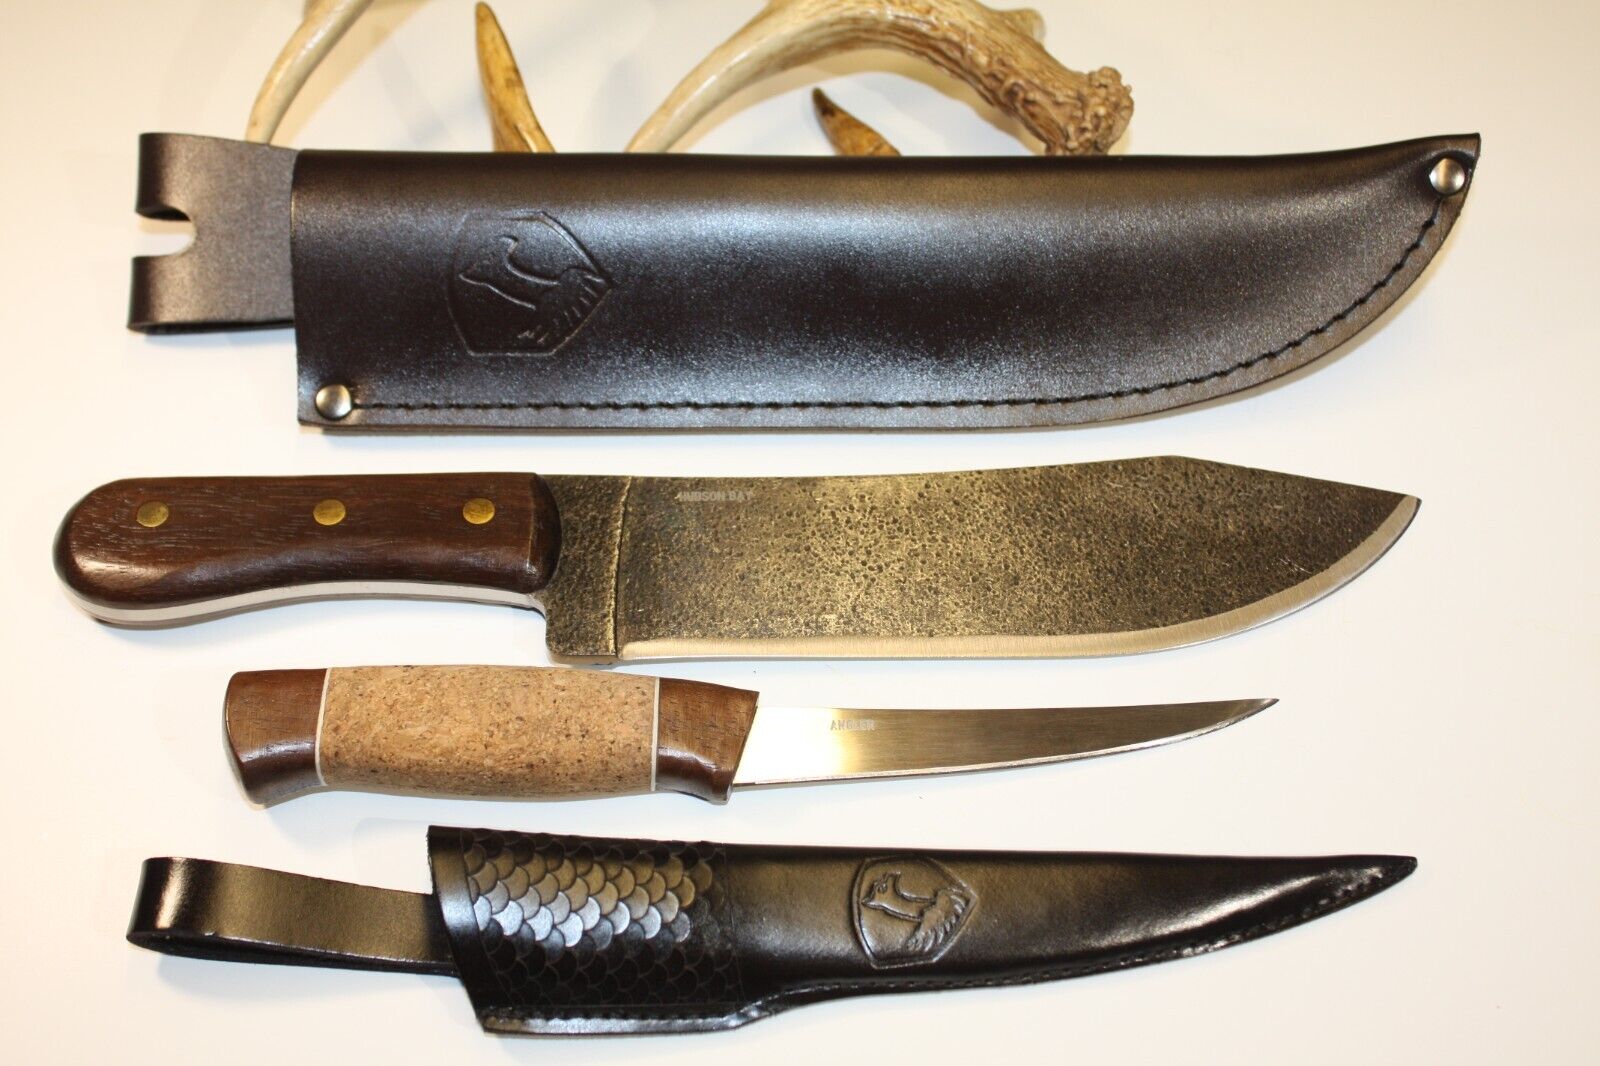 CONDOR -{ CAMPER SPECIAL SET } Knives and Sheaths.-NICE